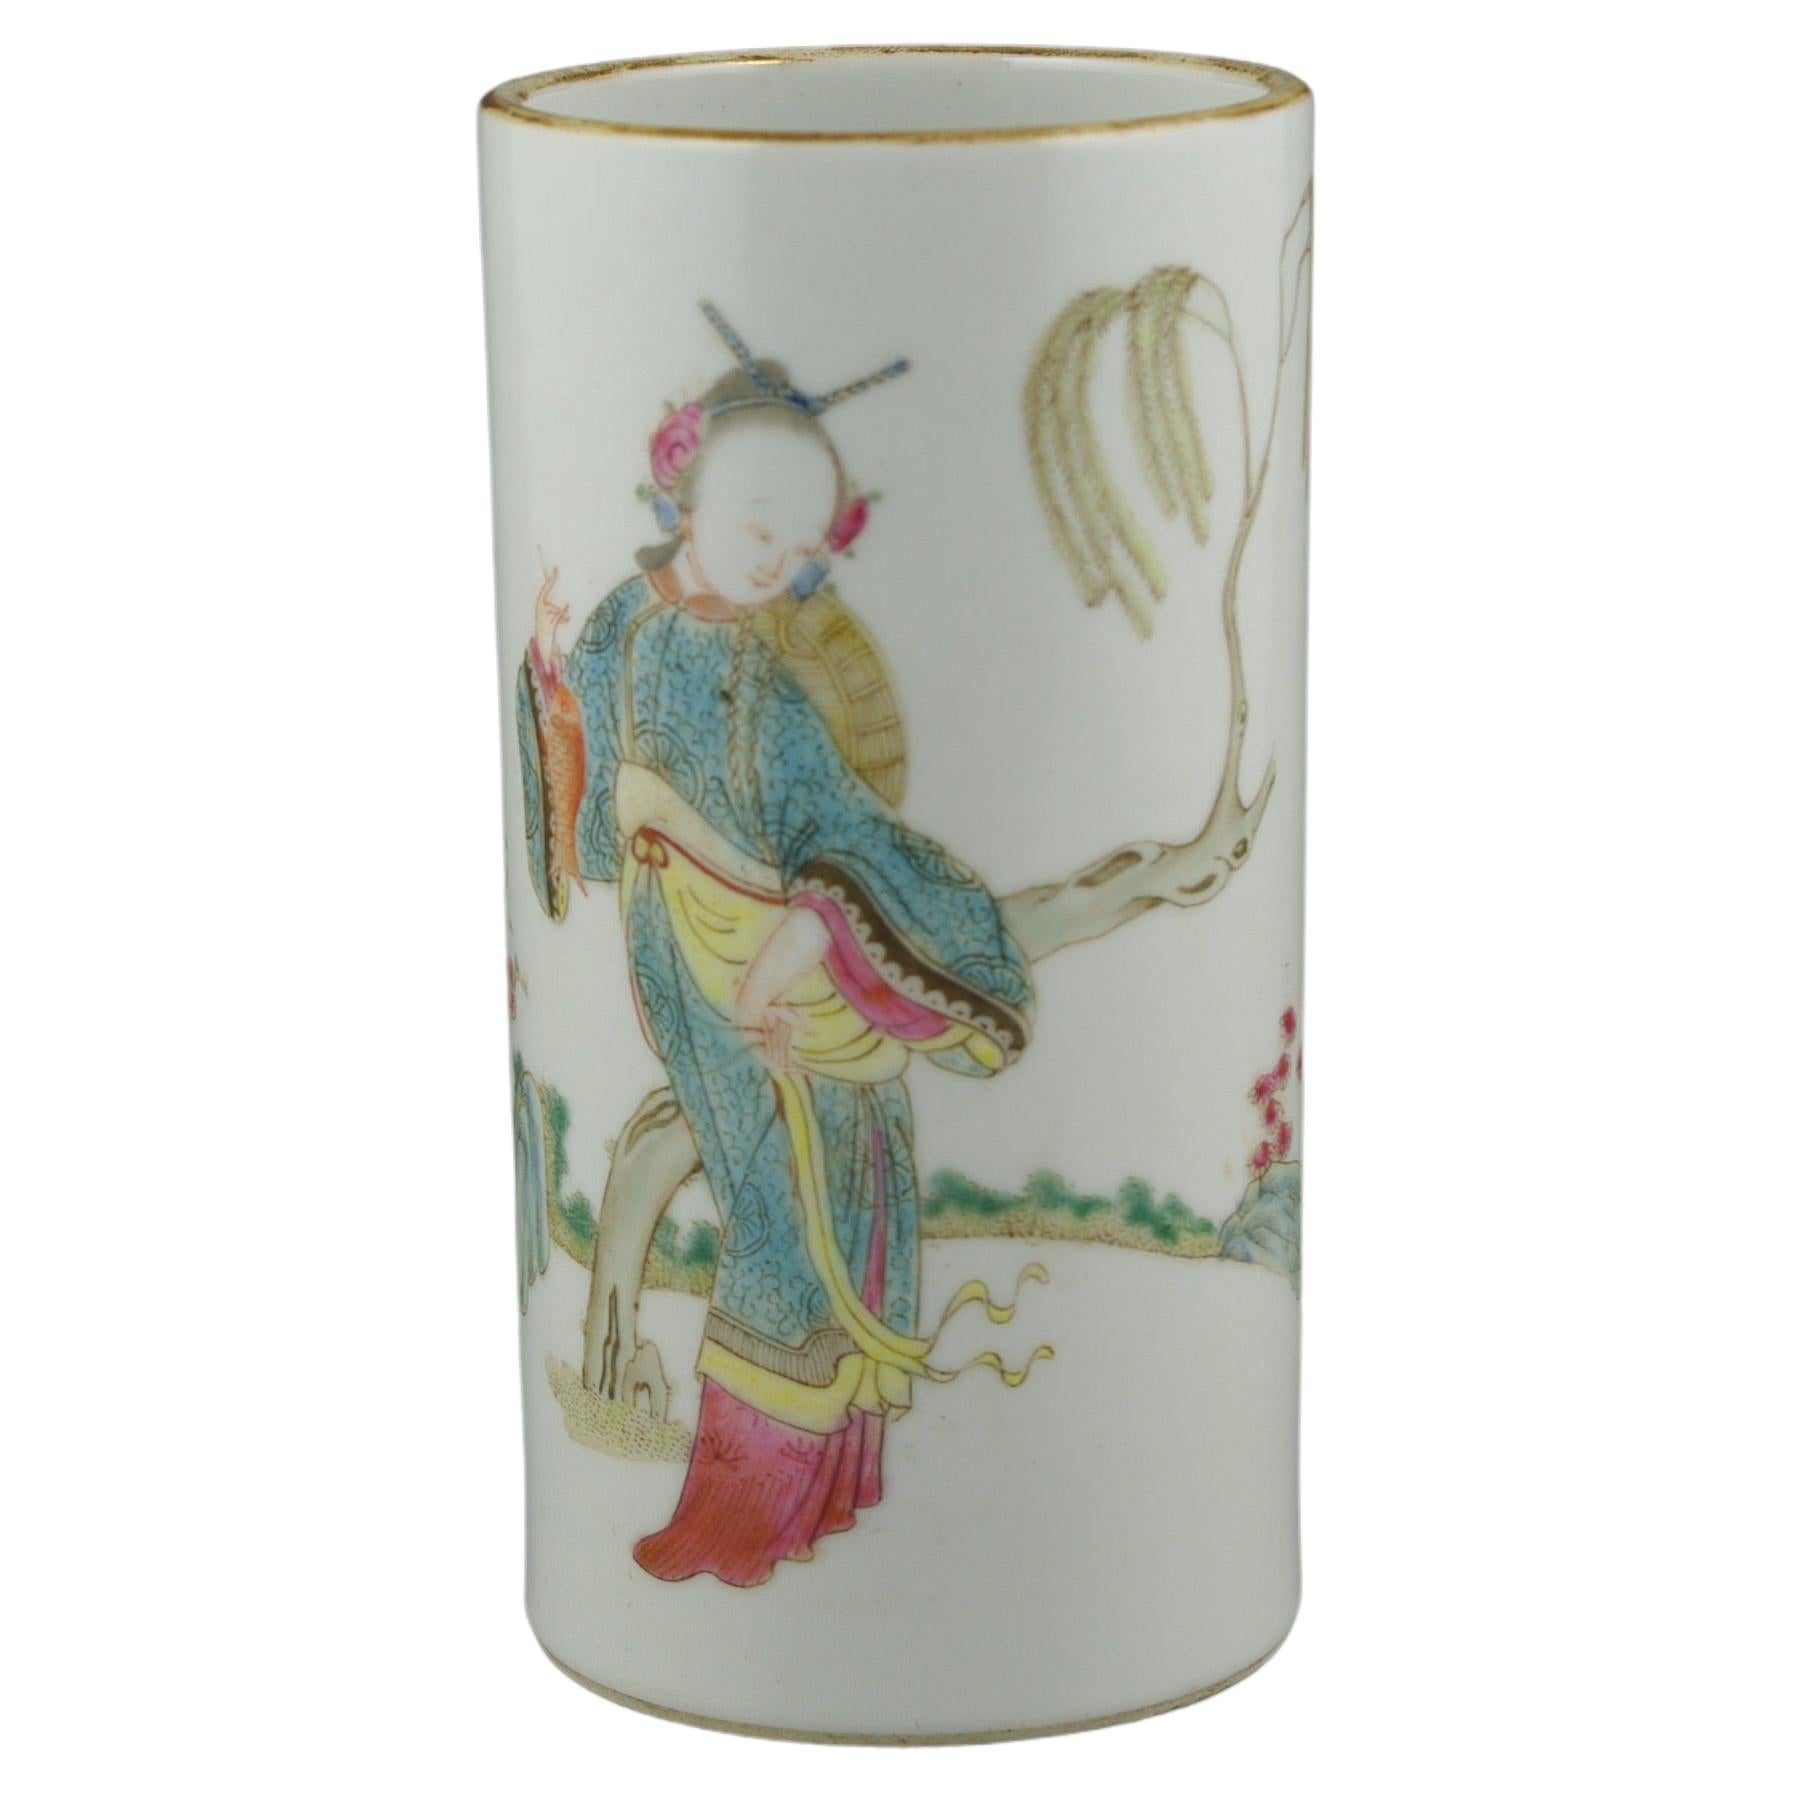 An antique Chinese porcelain brush pot, finely painted in famille rose fencai, of a court lady in a rocky garden scene, on white ground, with faded gold glaze mouth ring, and six character apocryphal reserve seal mark to base in dark red glaze